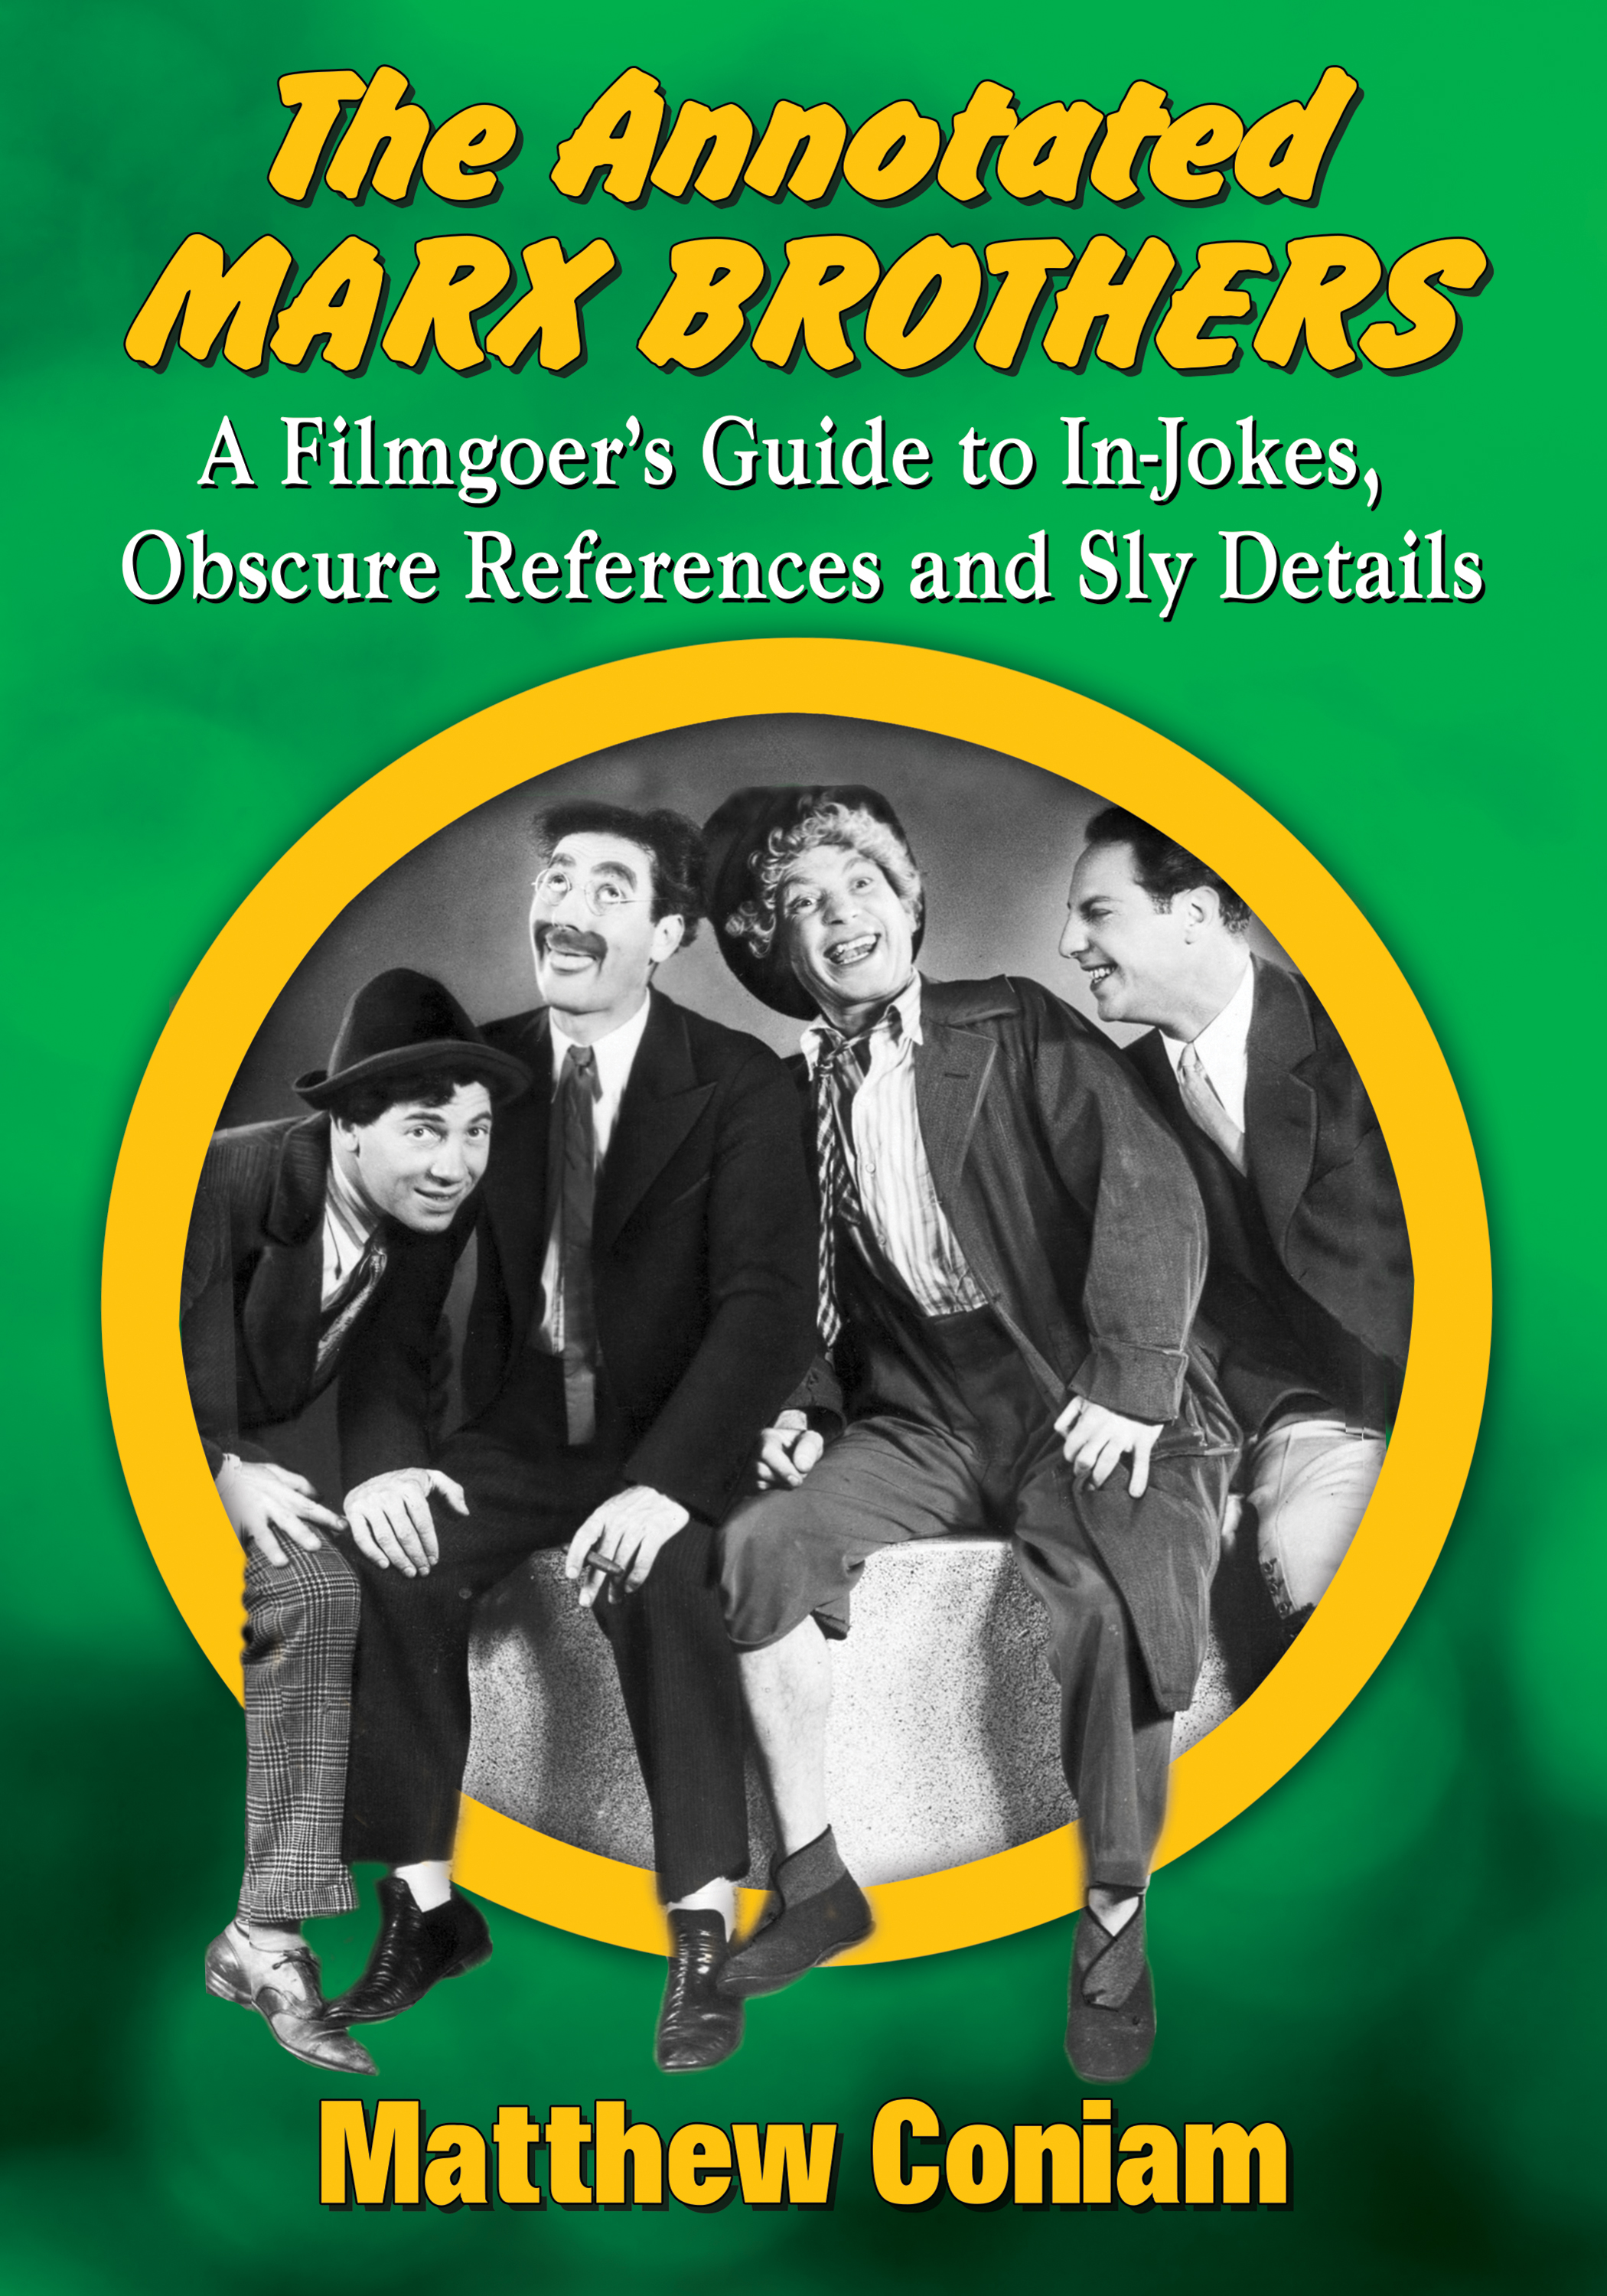 The Annotated Marx Brothers a filmgoers guide to in-jokes obscure references and sly details - image 1